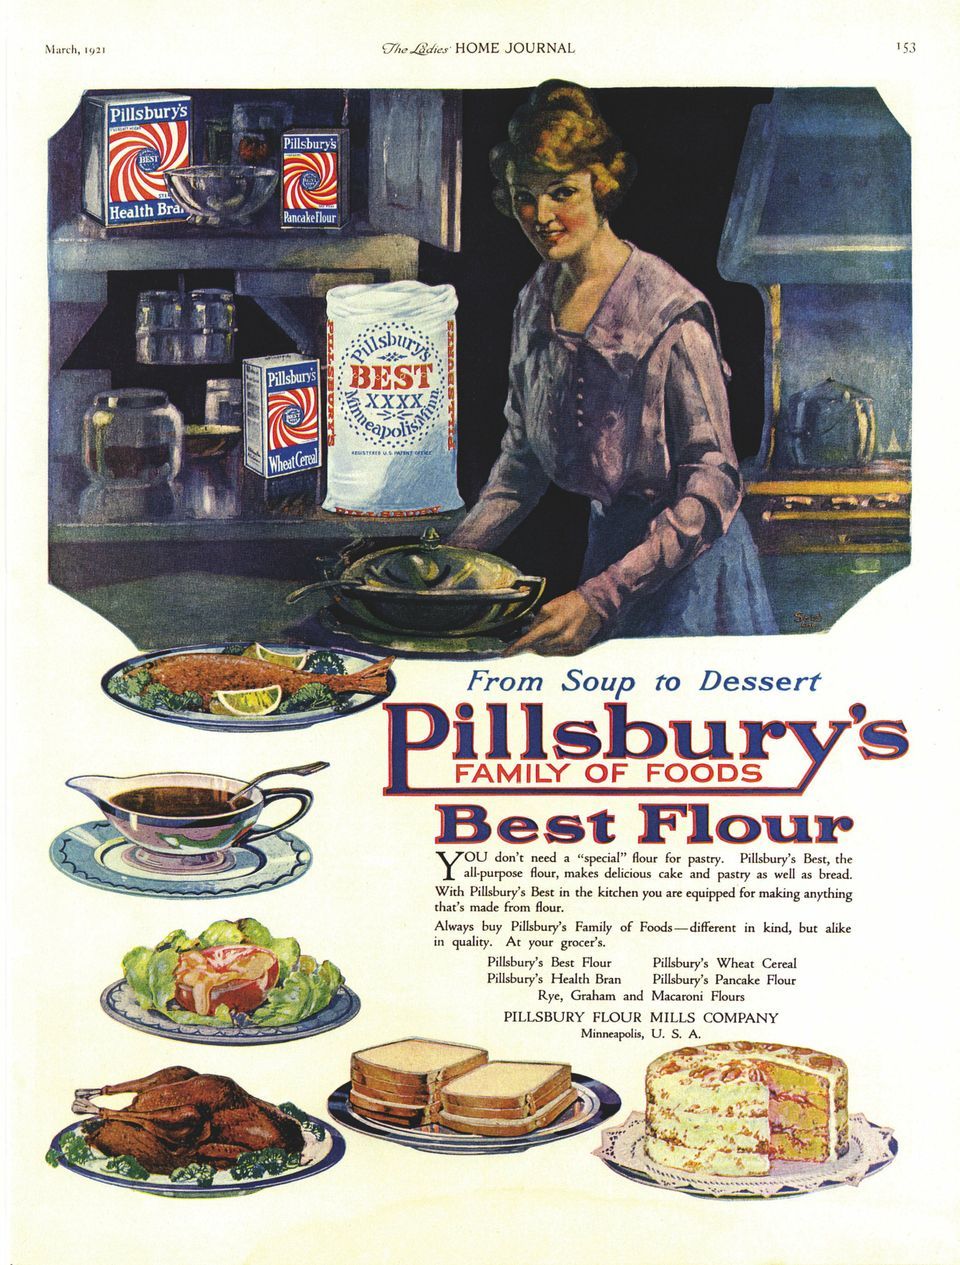 Pillsbury Flour Mills Company - published in Ladies' Home Journal - March 1921